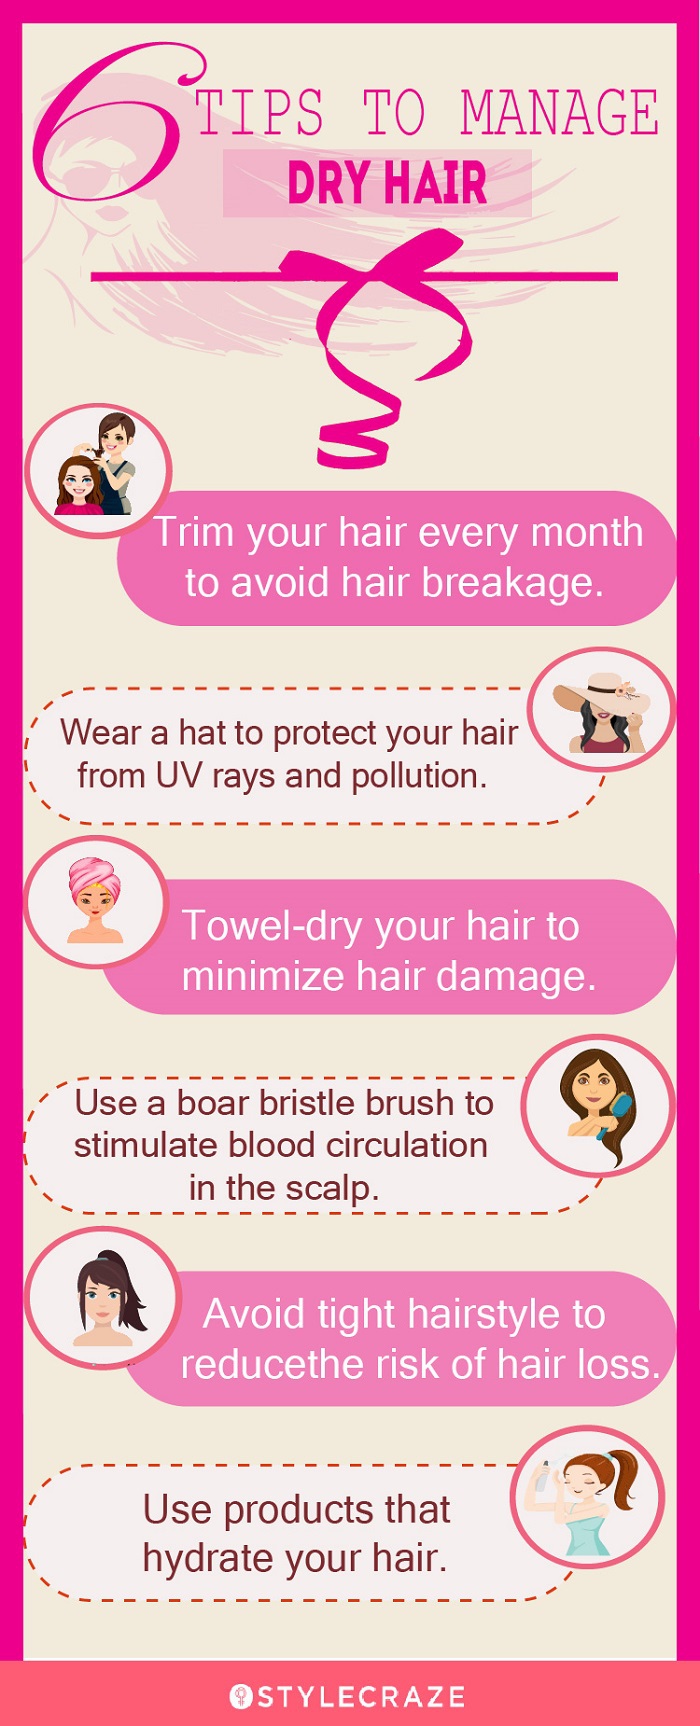 6 tips to manage dry hair [infographic]